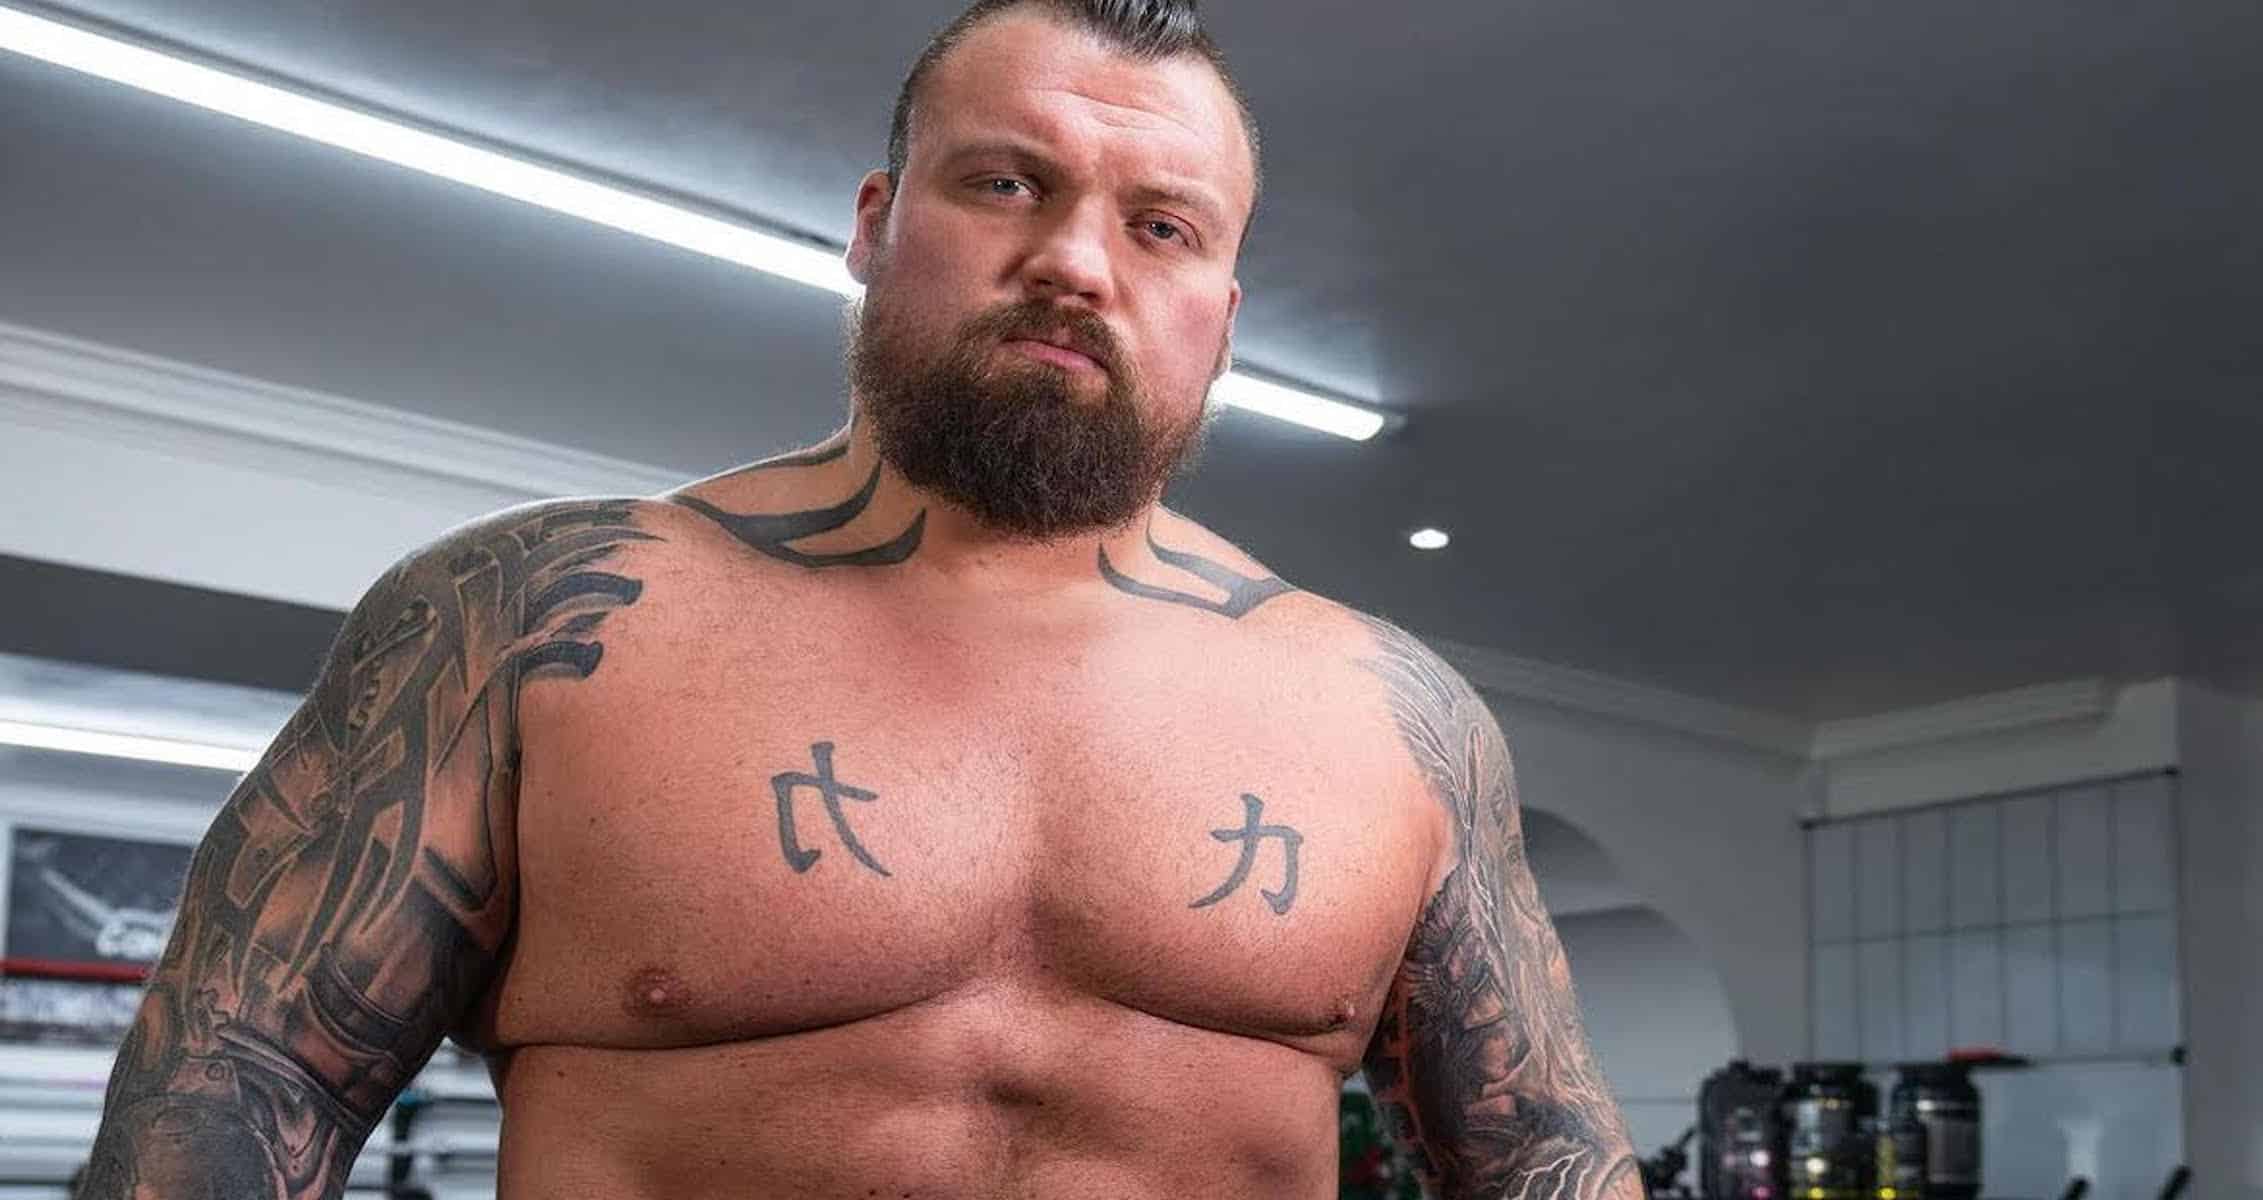 Eddie Hall shared what a day in his life looks like.